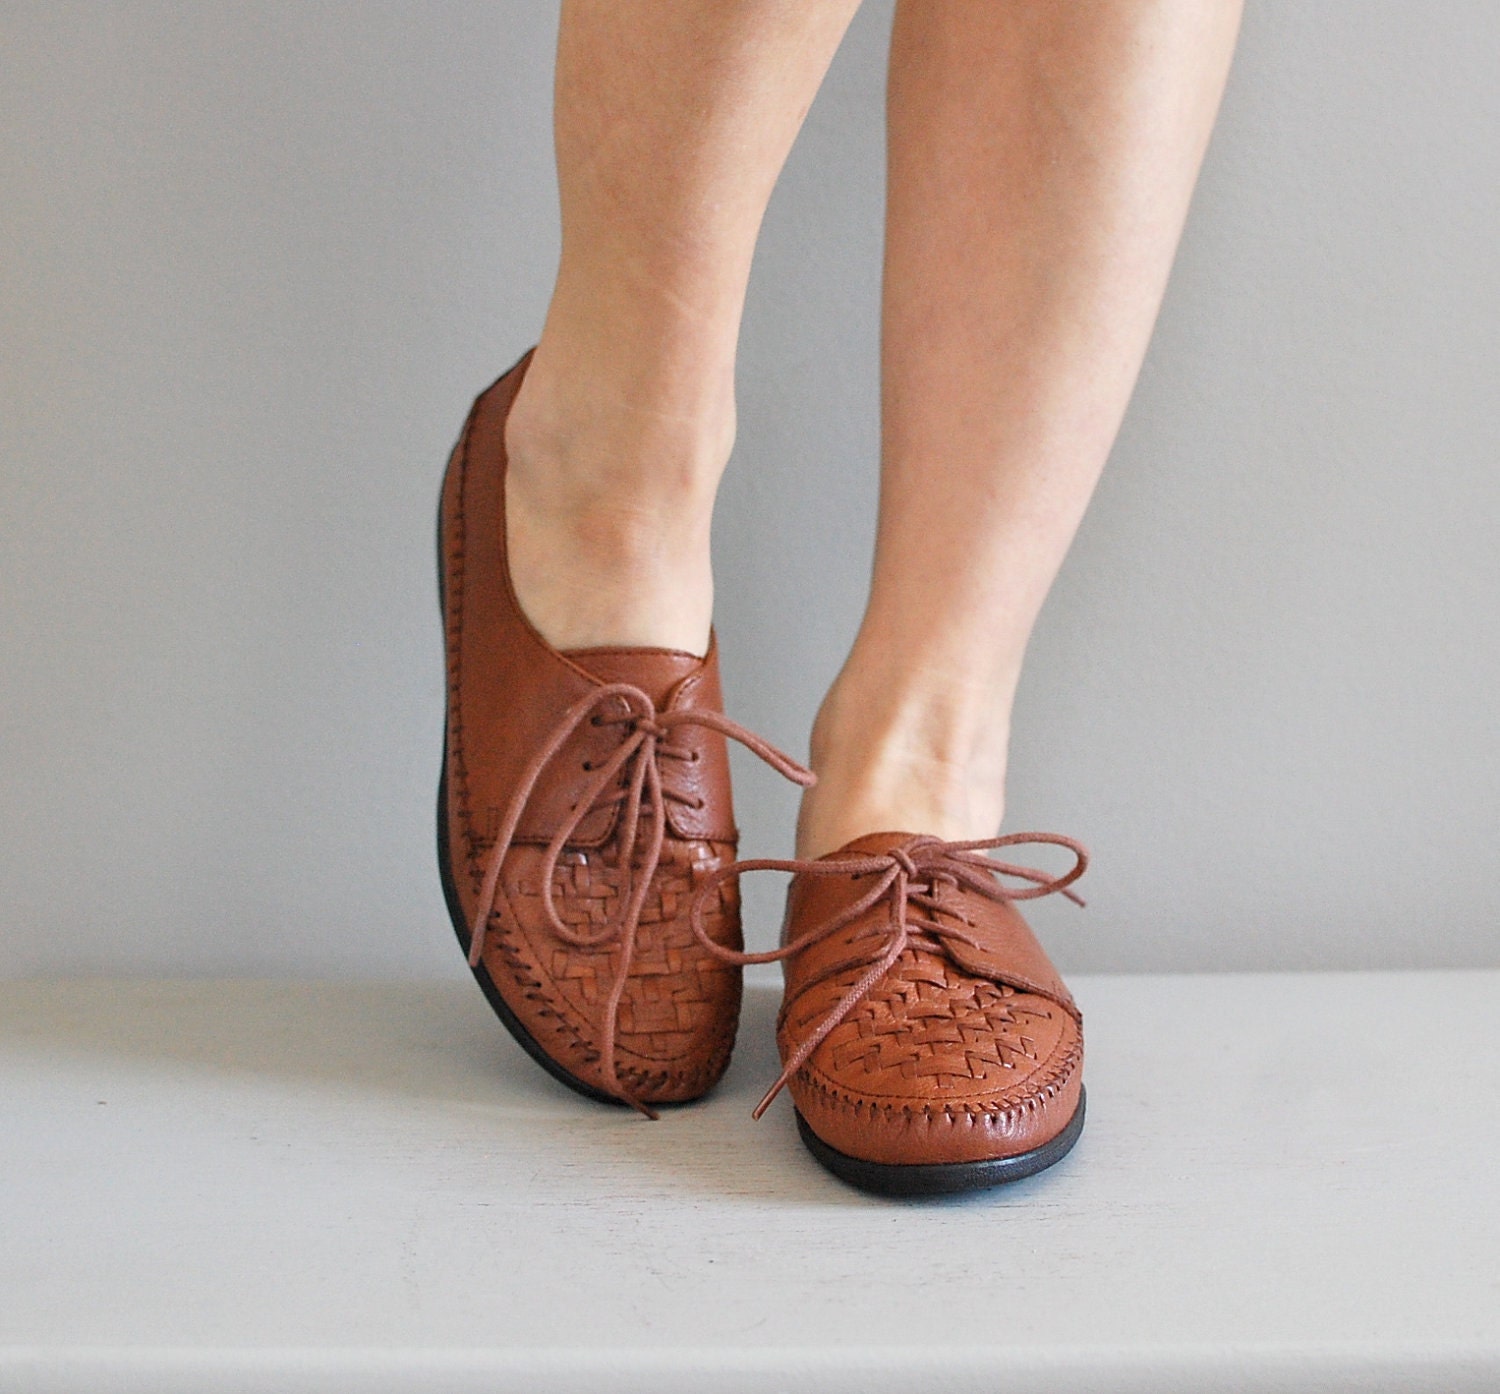 leather oxfords / lace up loafers / Basketweave by DearGolden